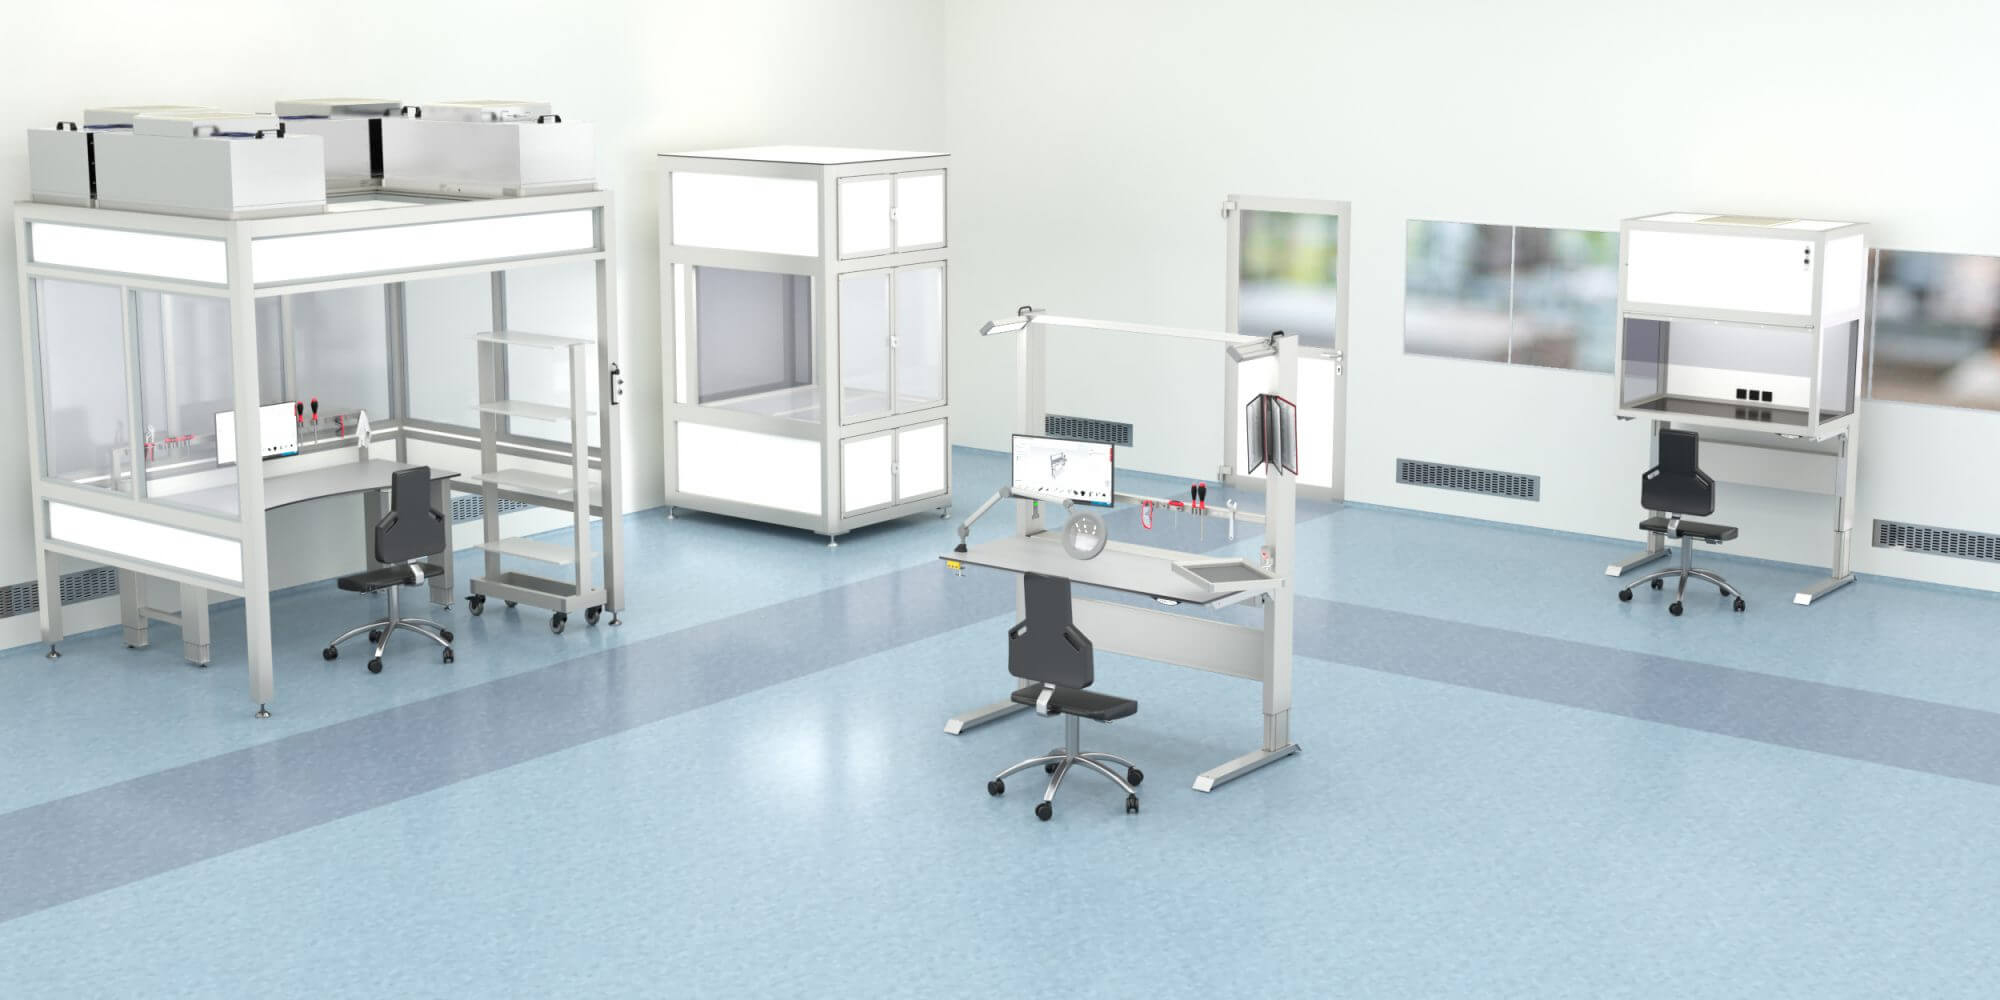 Cleanroom: Defining, designing and working in cleanrooms